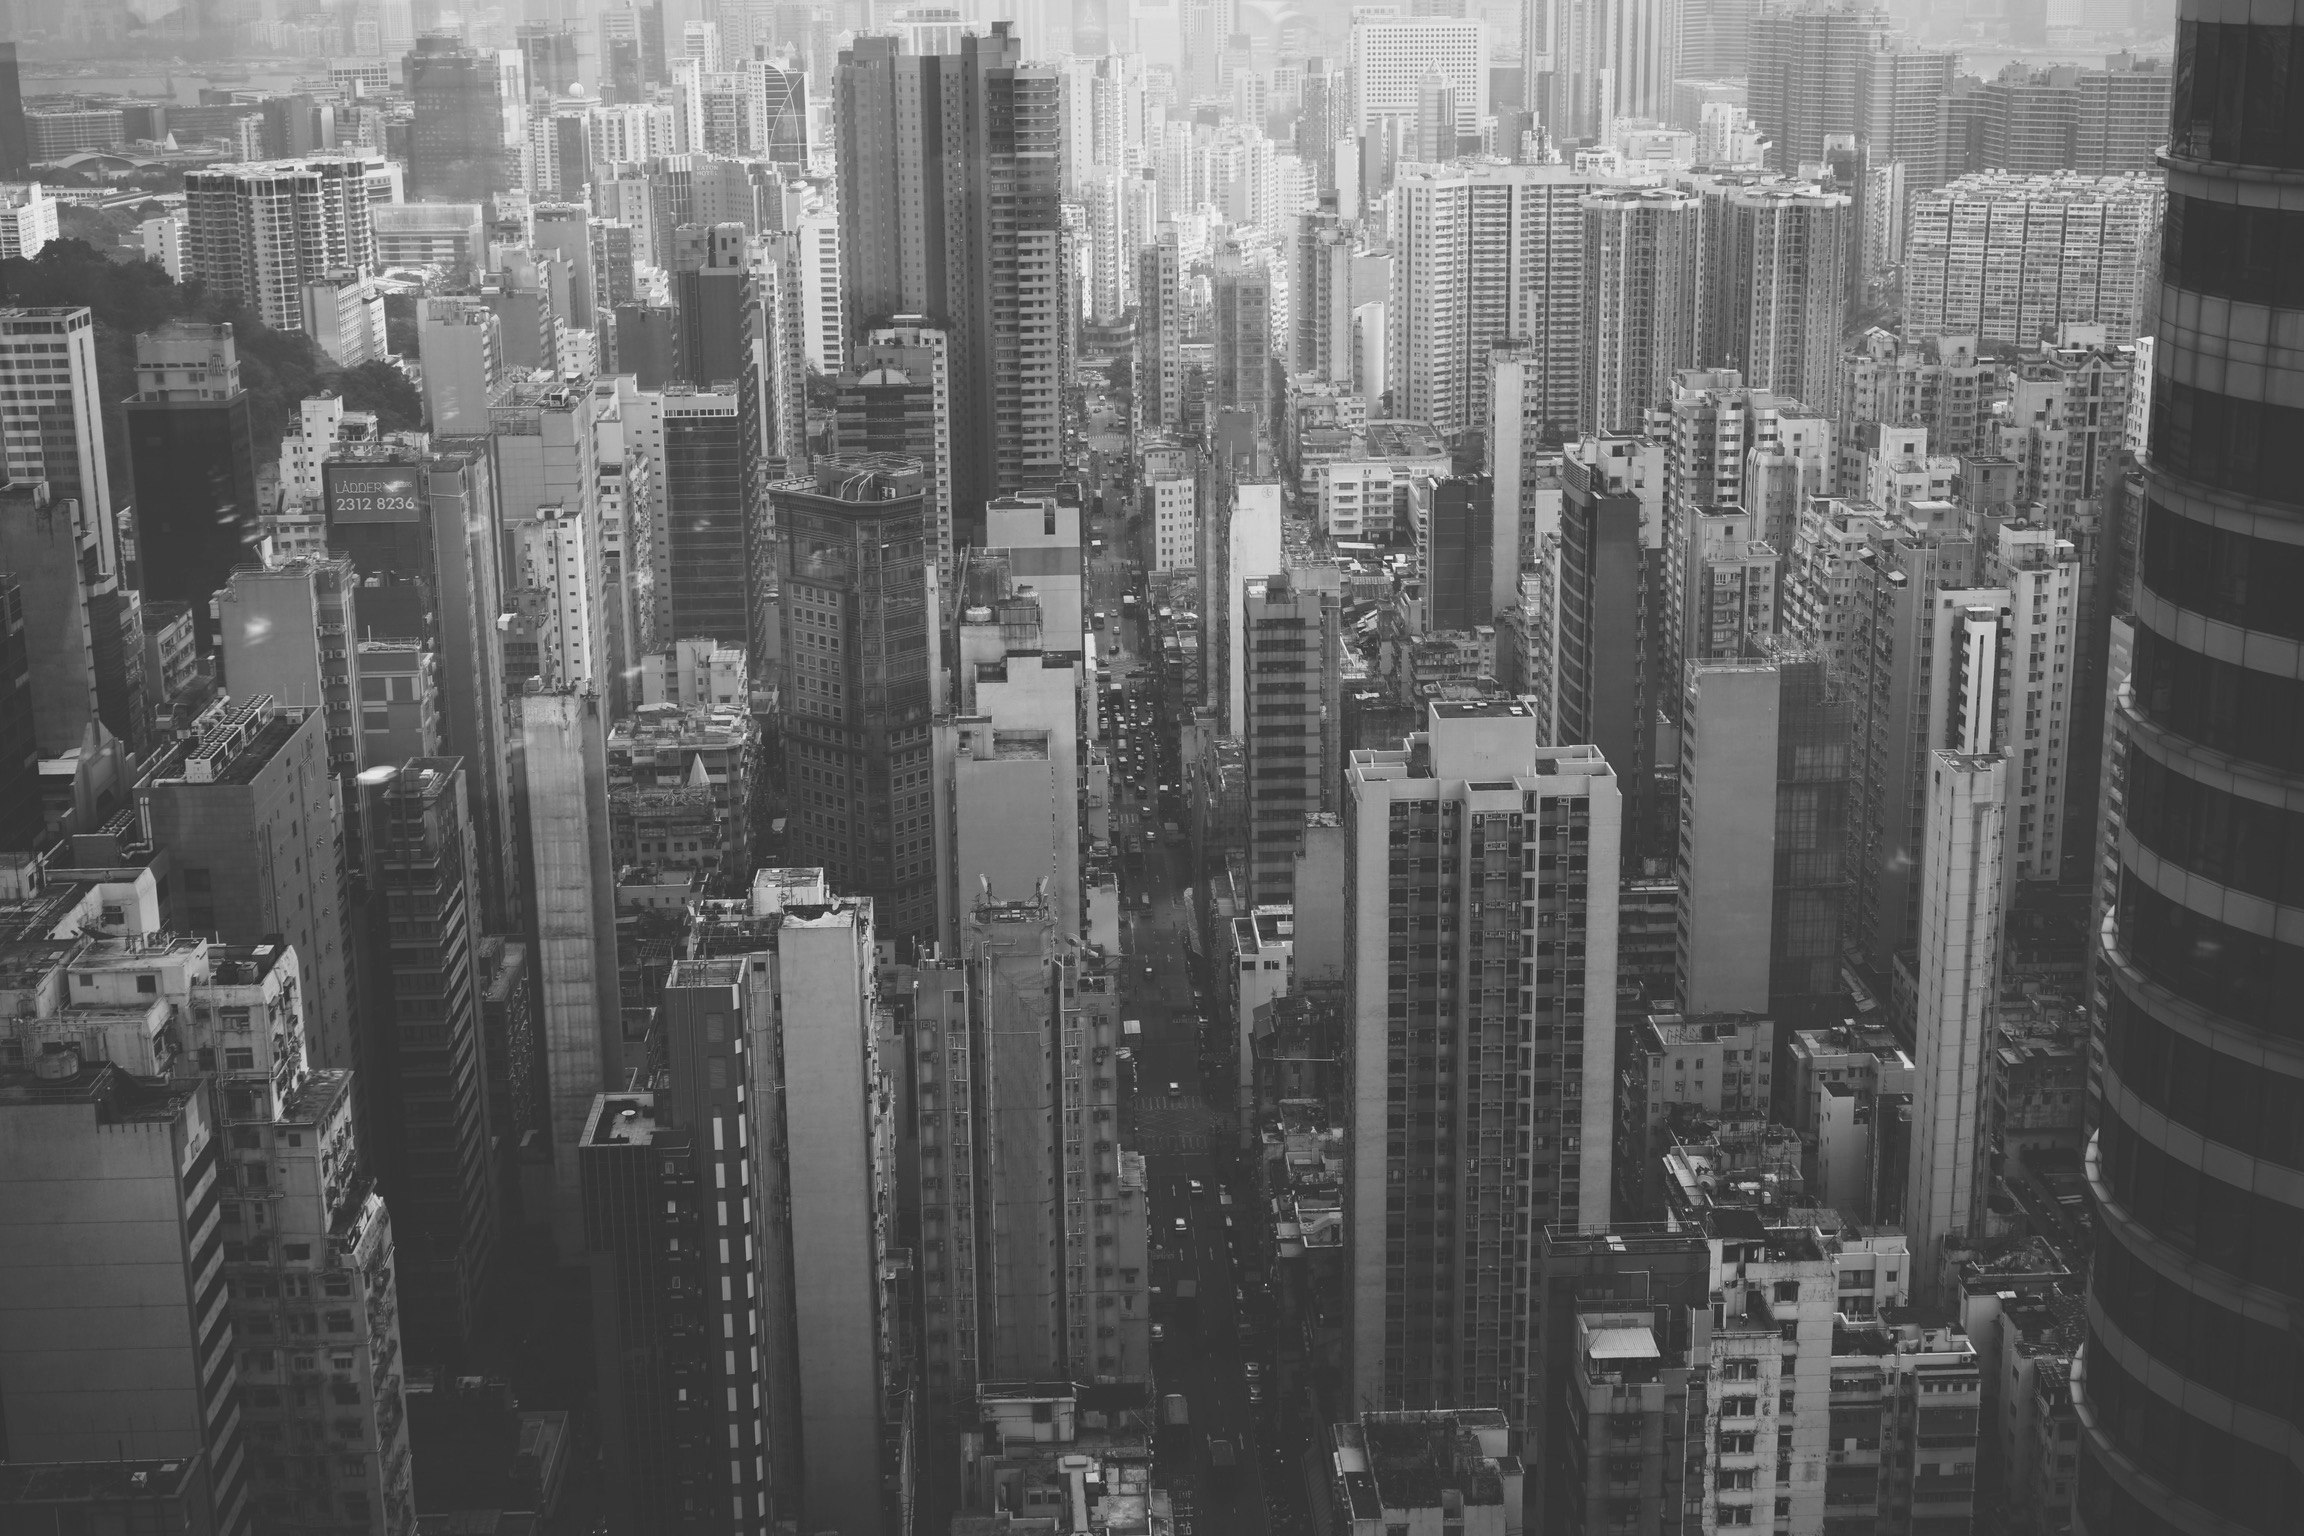 a black and white city scene of skyscrs with many floors